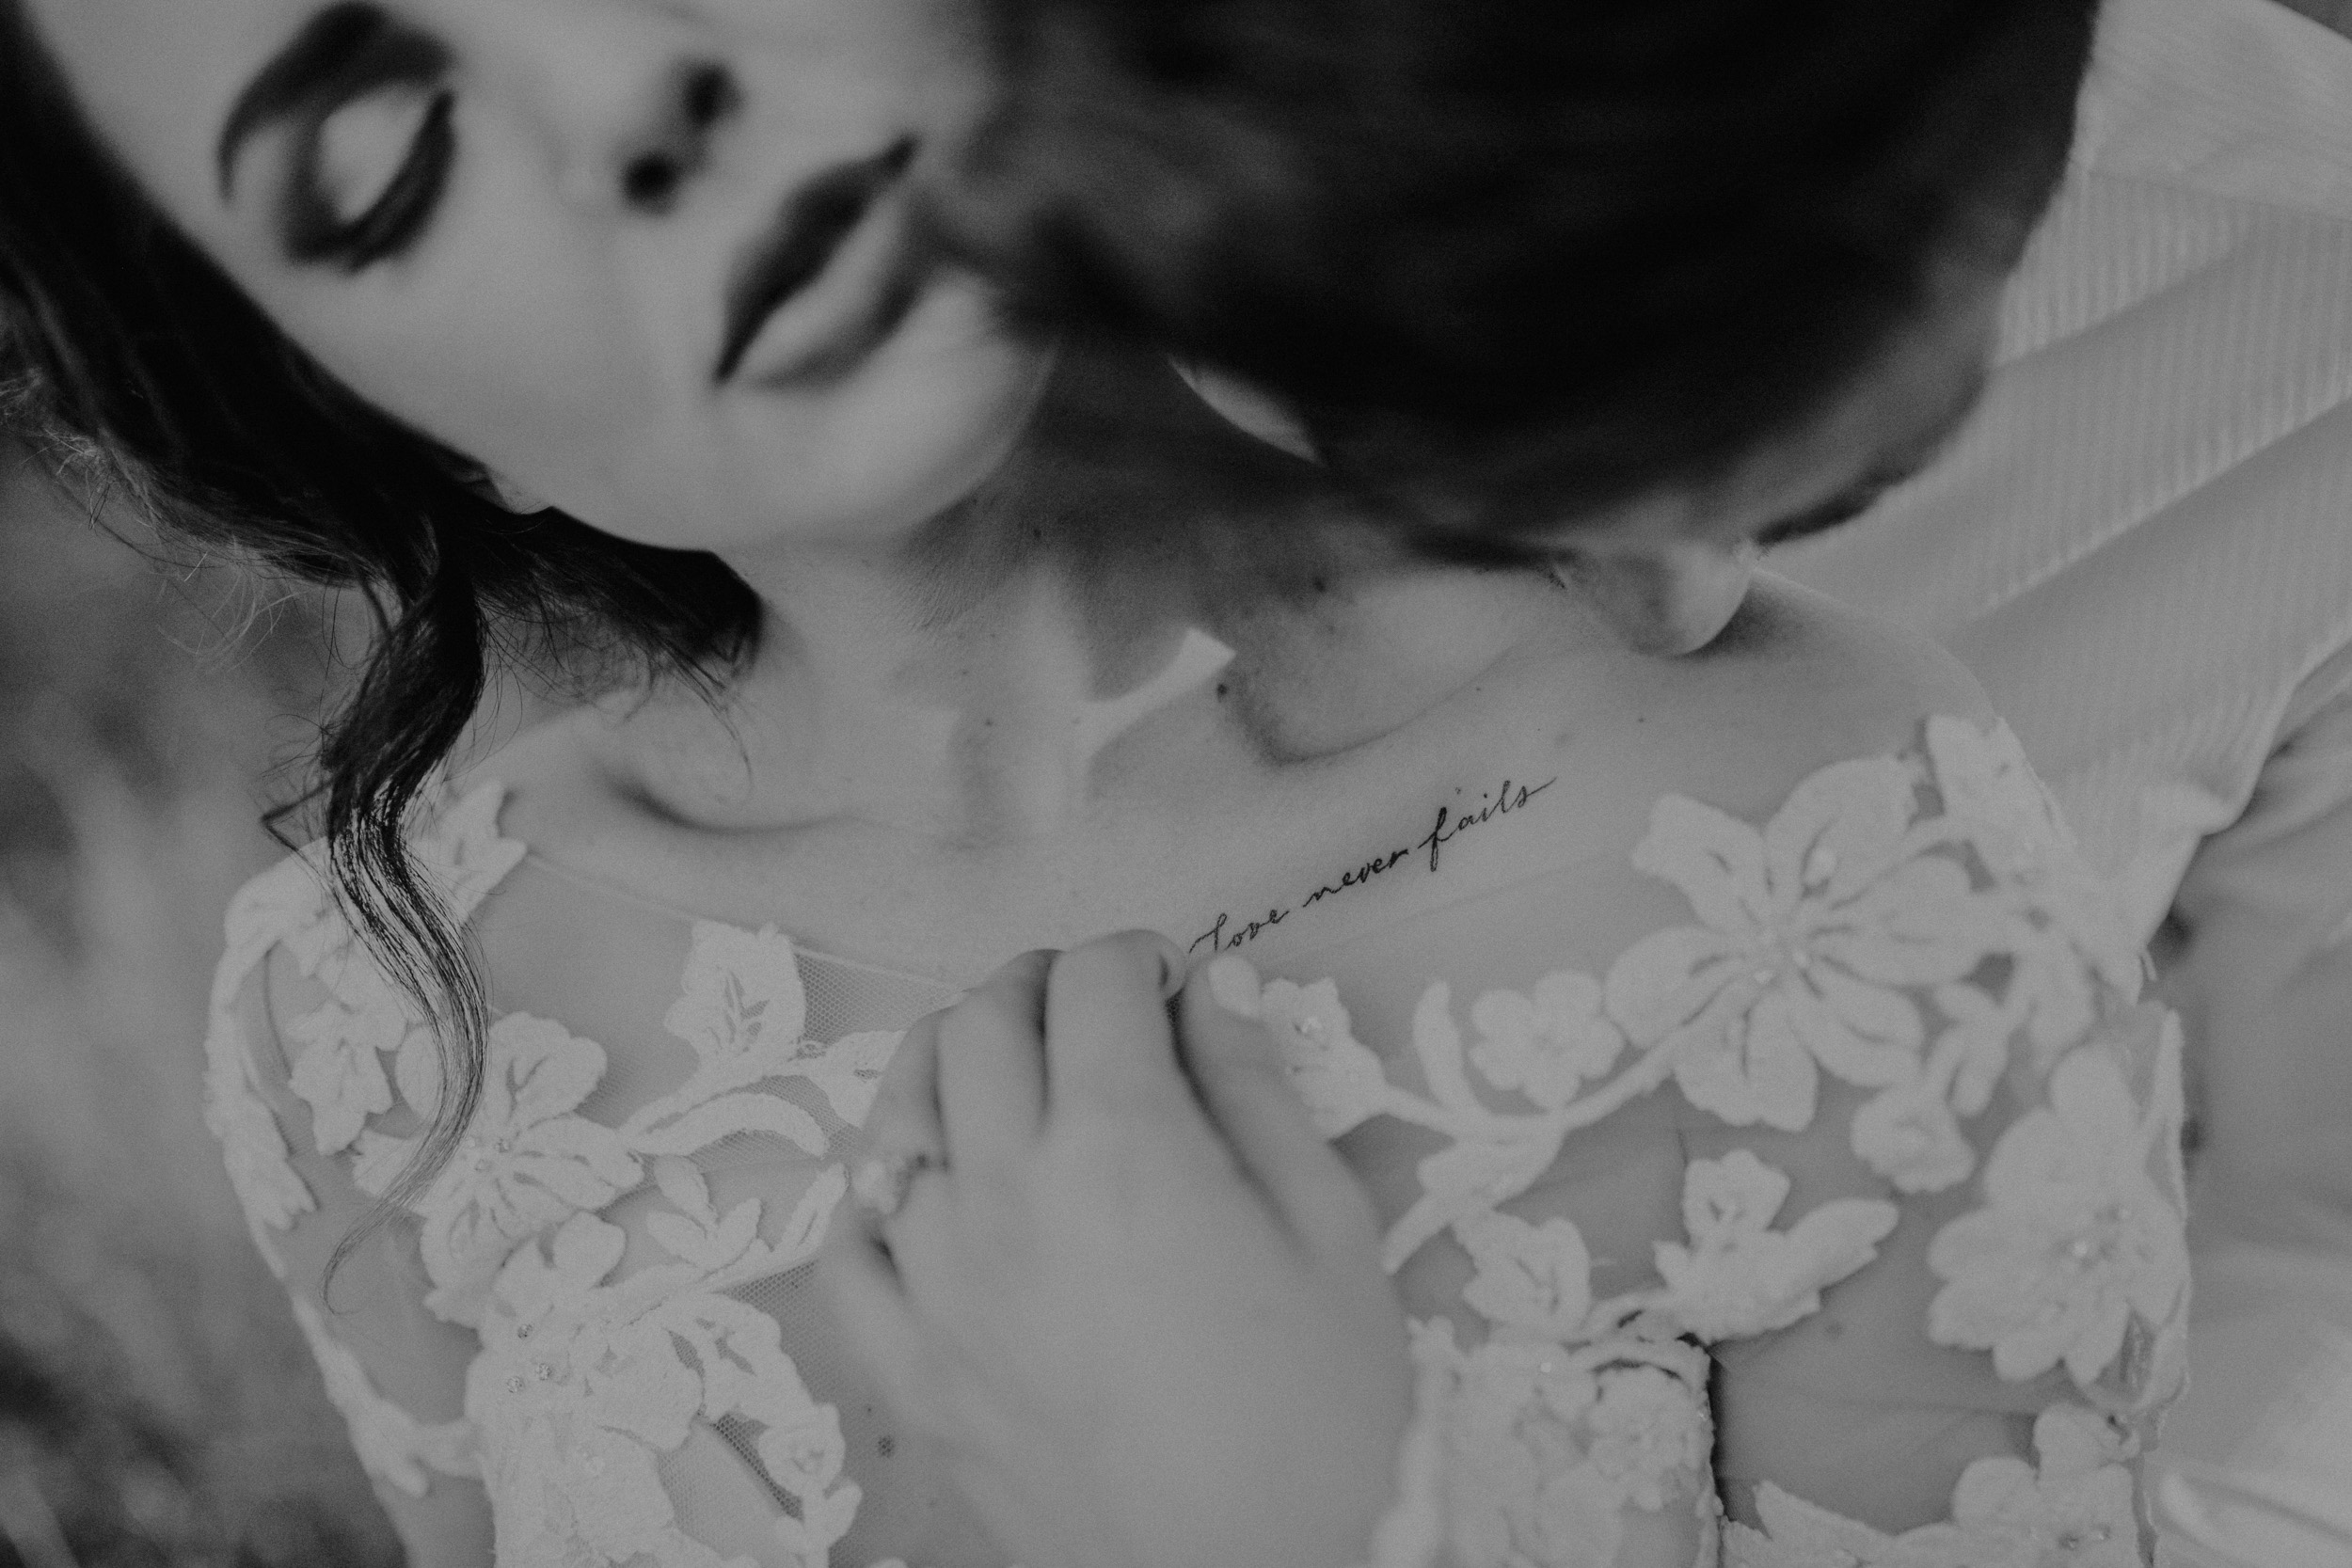 Bride in lace dress with collarbone tattoo